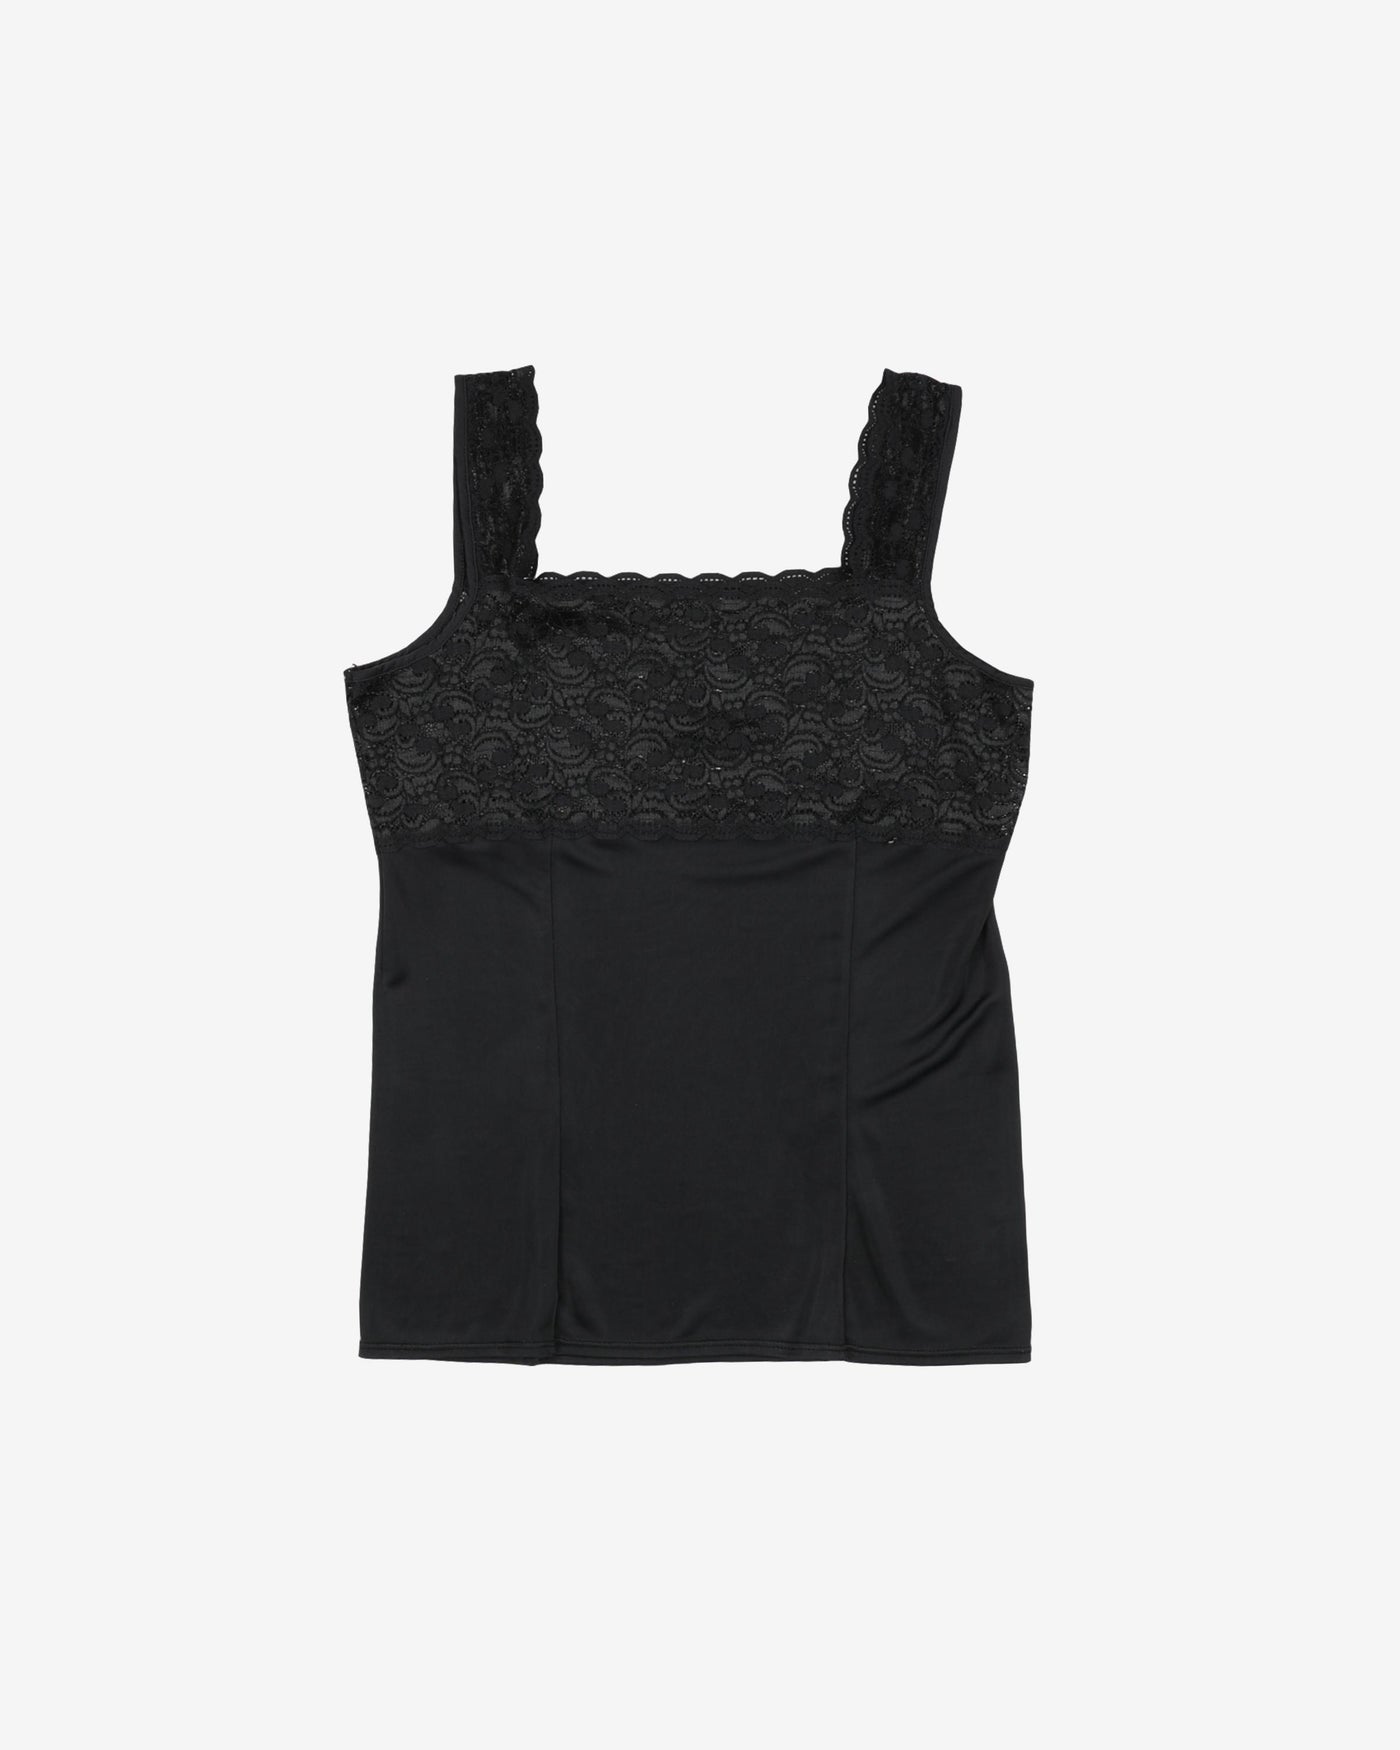 1990's black with lace cami top - S / M